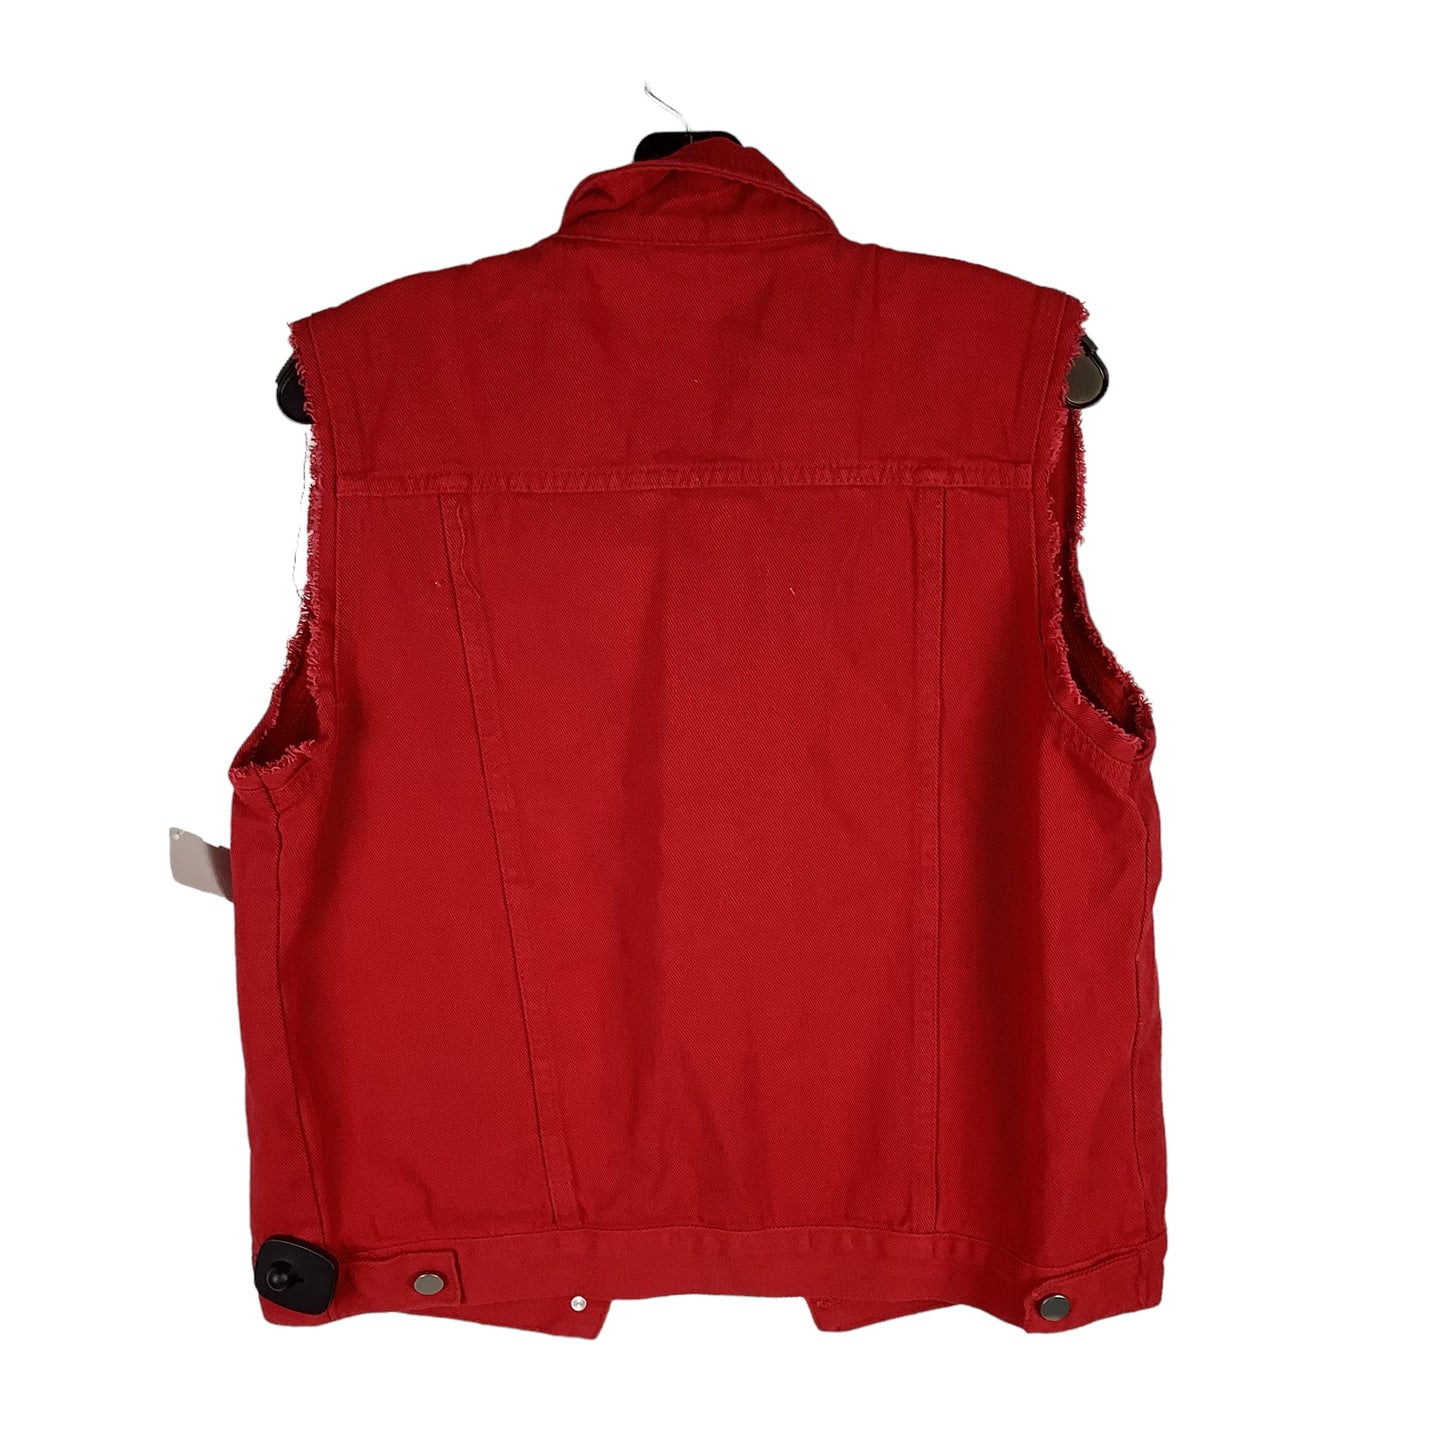 Vest Other By Clothes Mentor  Size: 4x